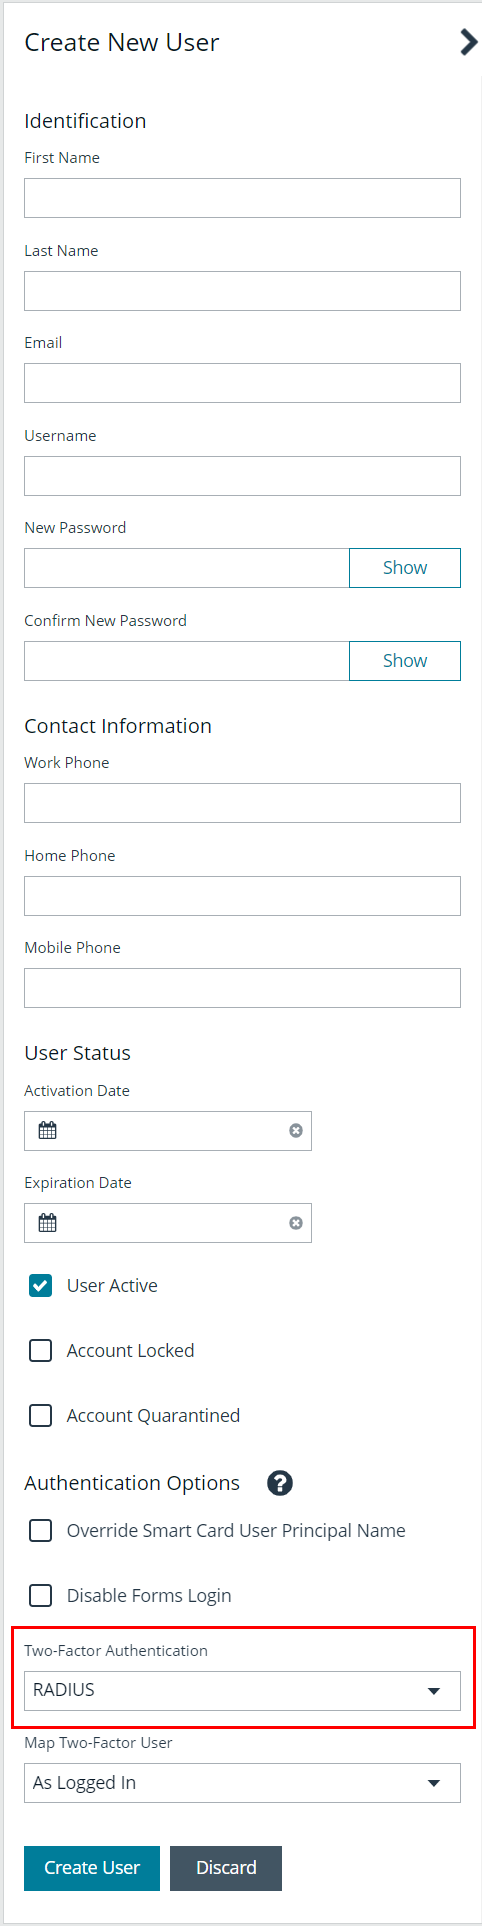 Screen Capture of RADIUS Two-Factor Authentication Option on a User Account